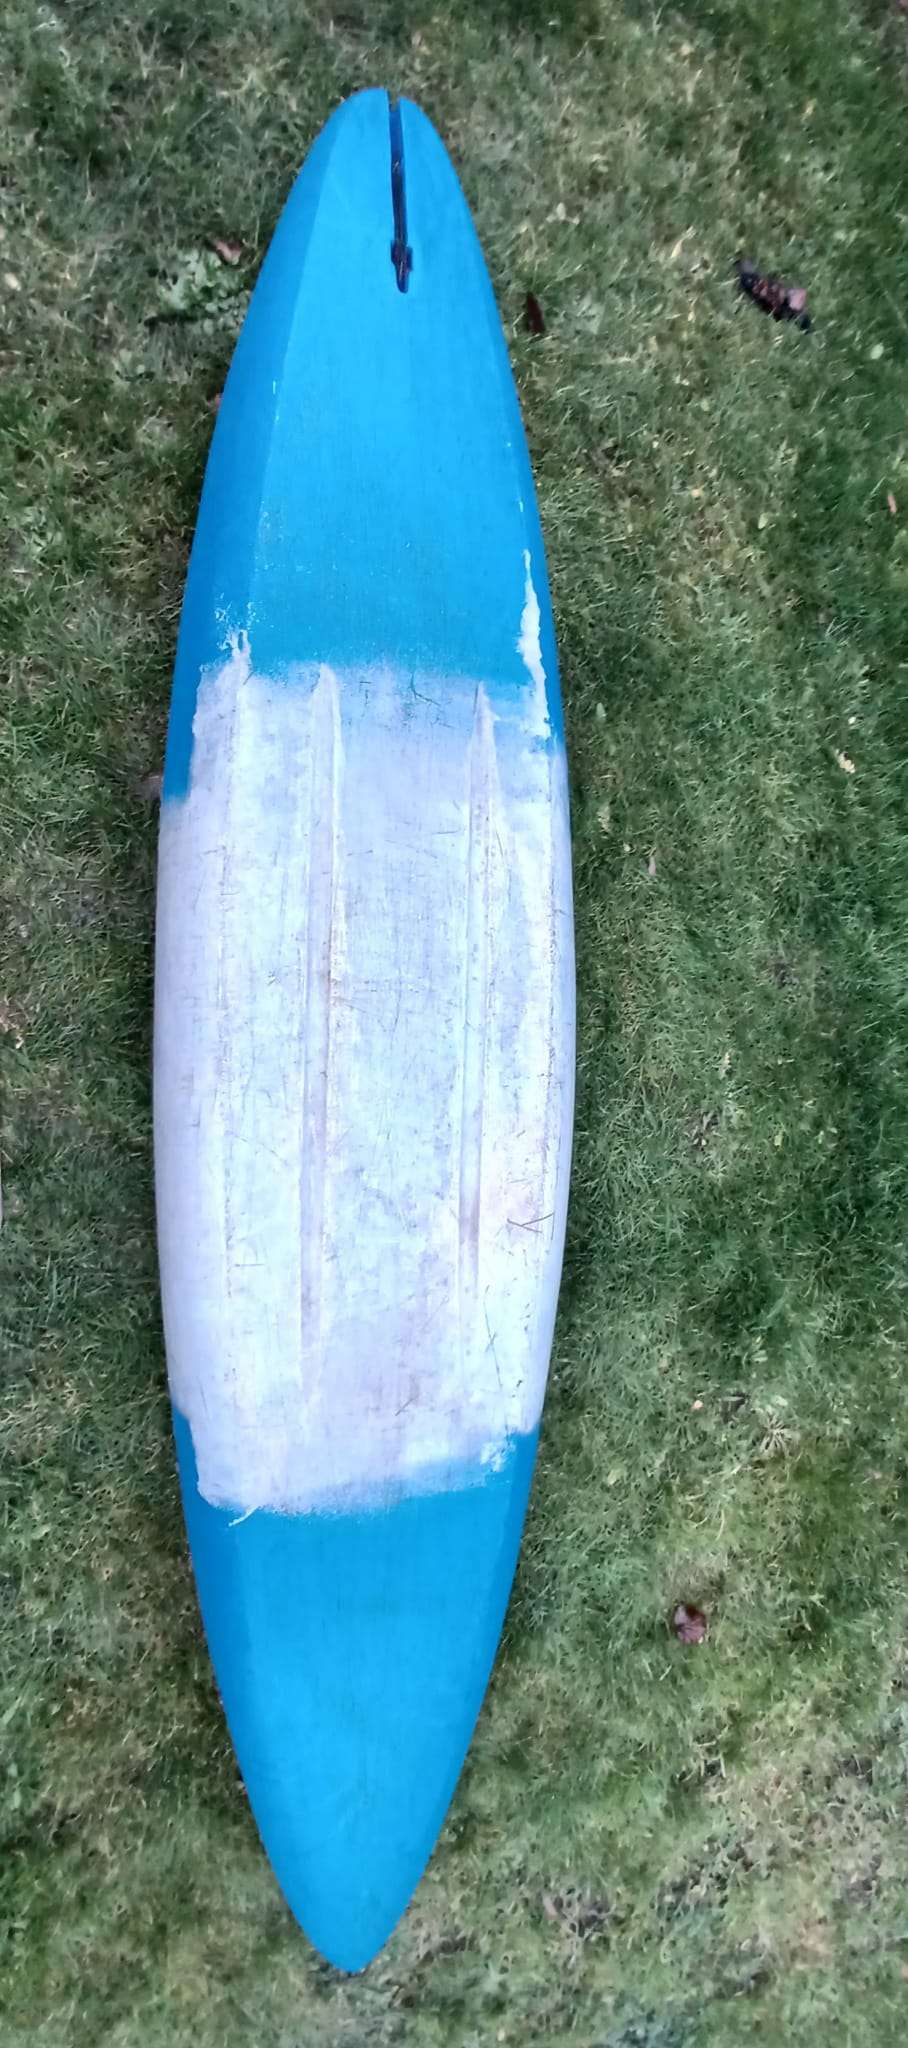 A surfboard on the grass

Description automatically generated